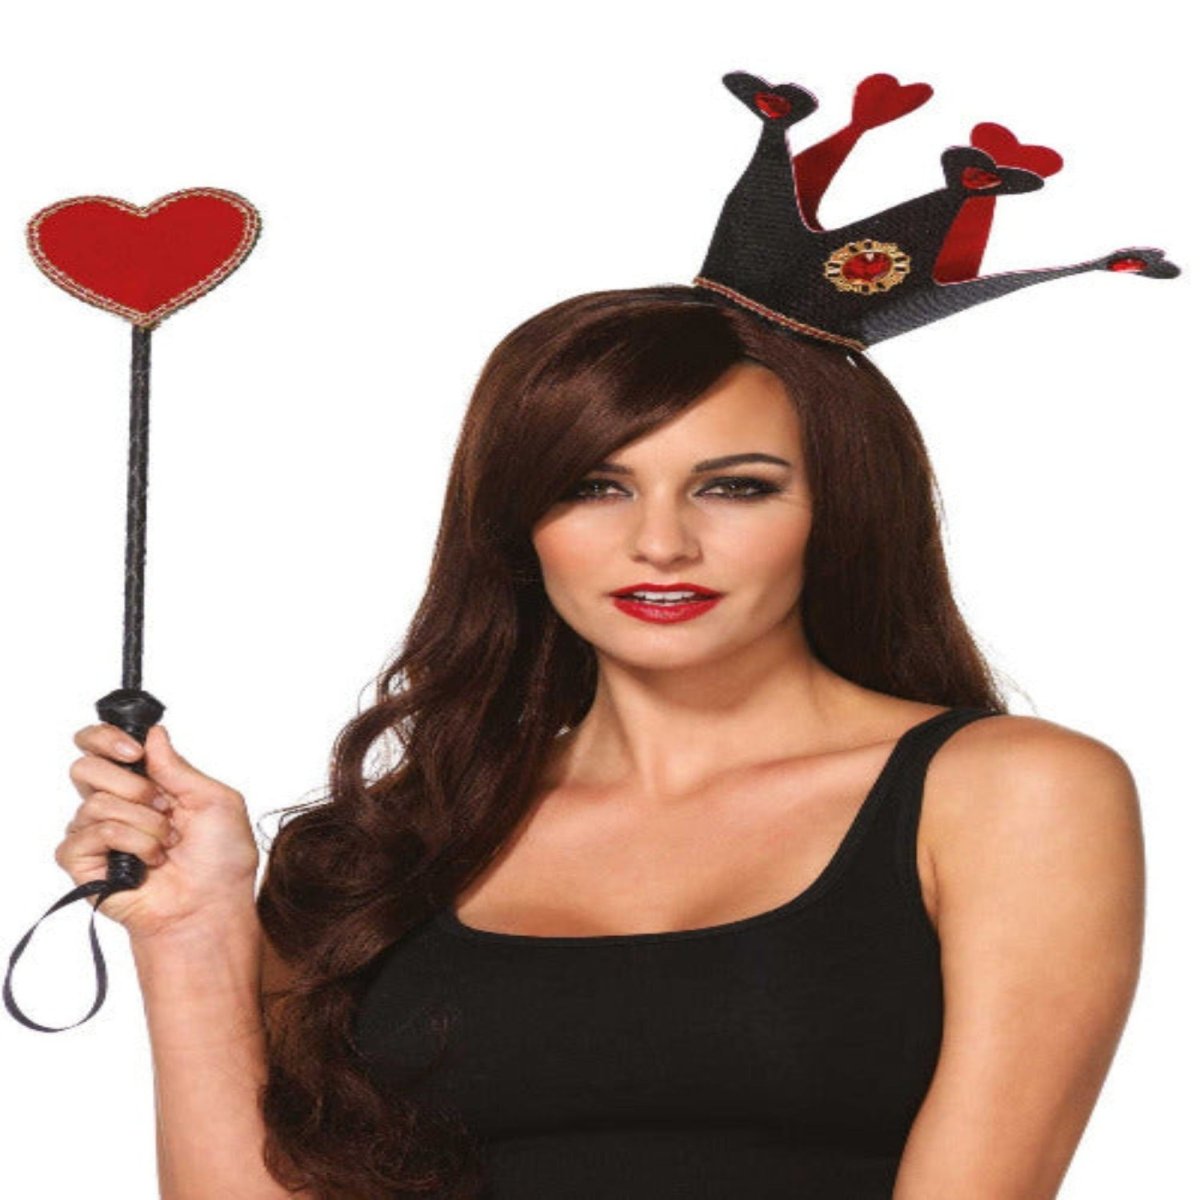 Royal Crown Headband and Heart Scepter - worldclasscostumes